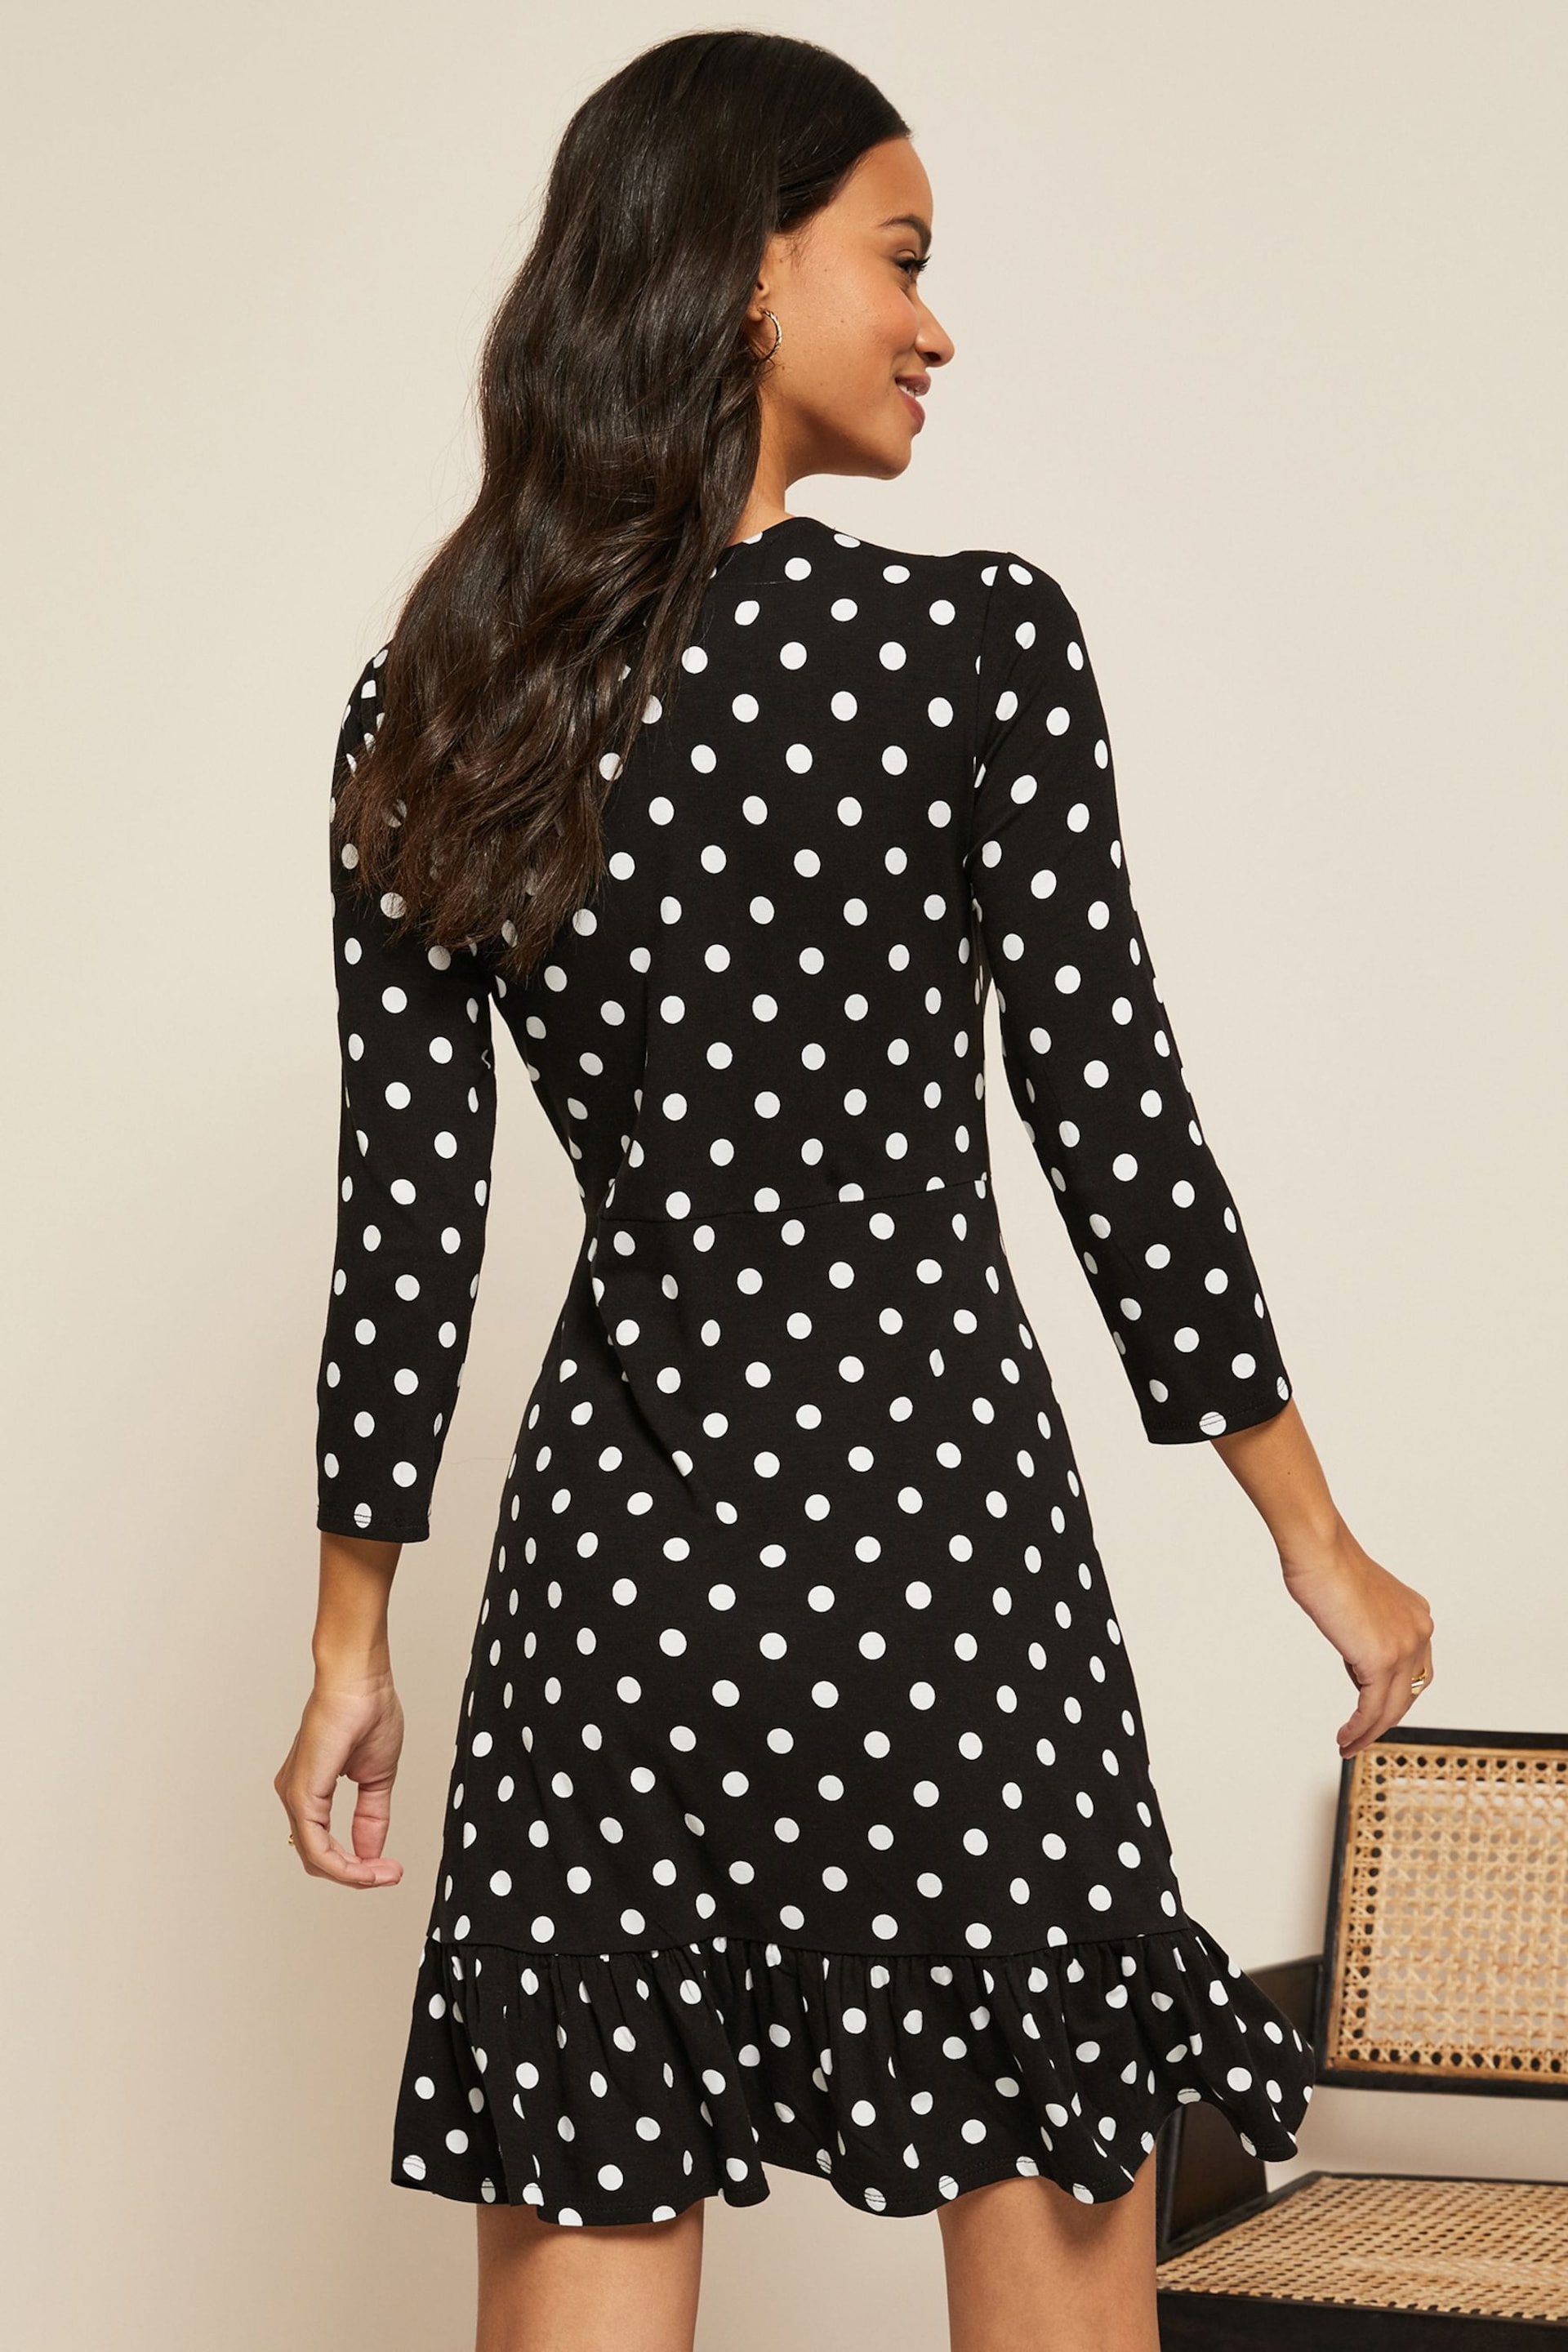 Friends Like These Black/White Spot Fit And Flare Round Neck 3/4 Sleeve Dress - Image 2 of 4